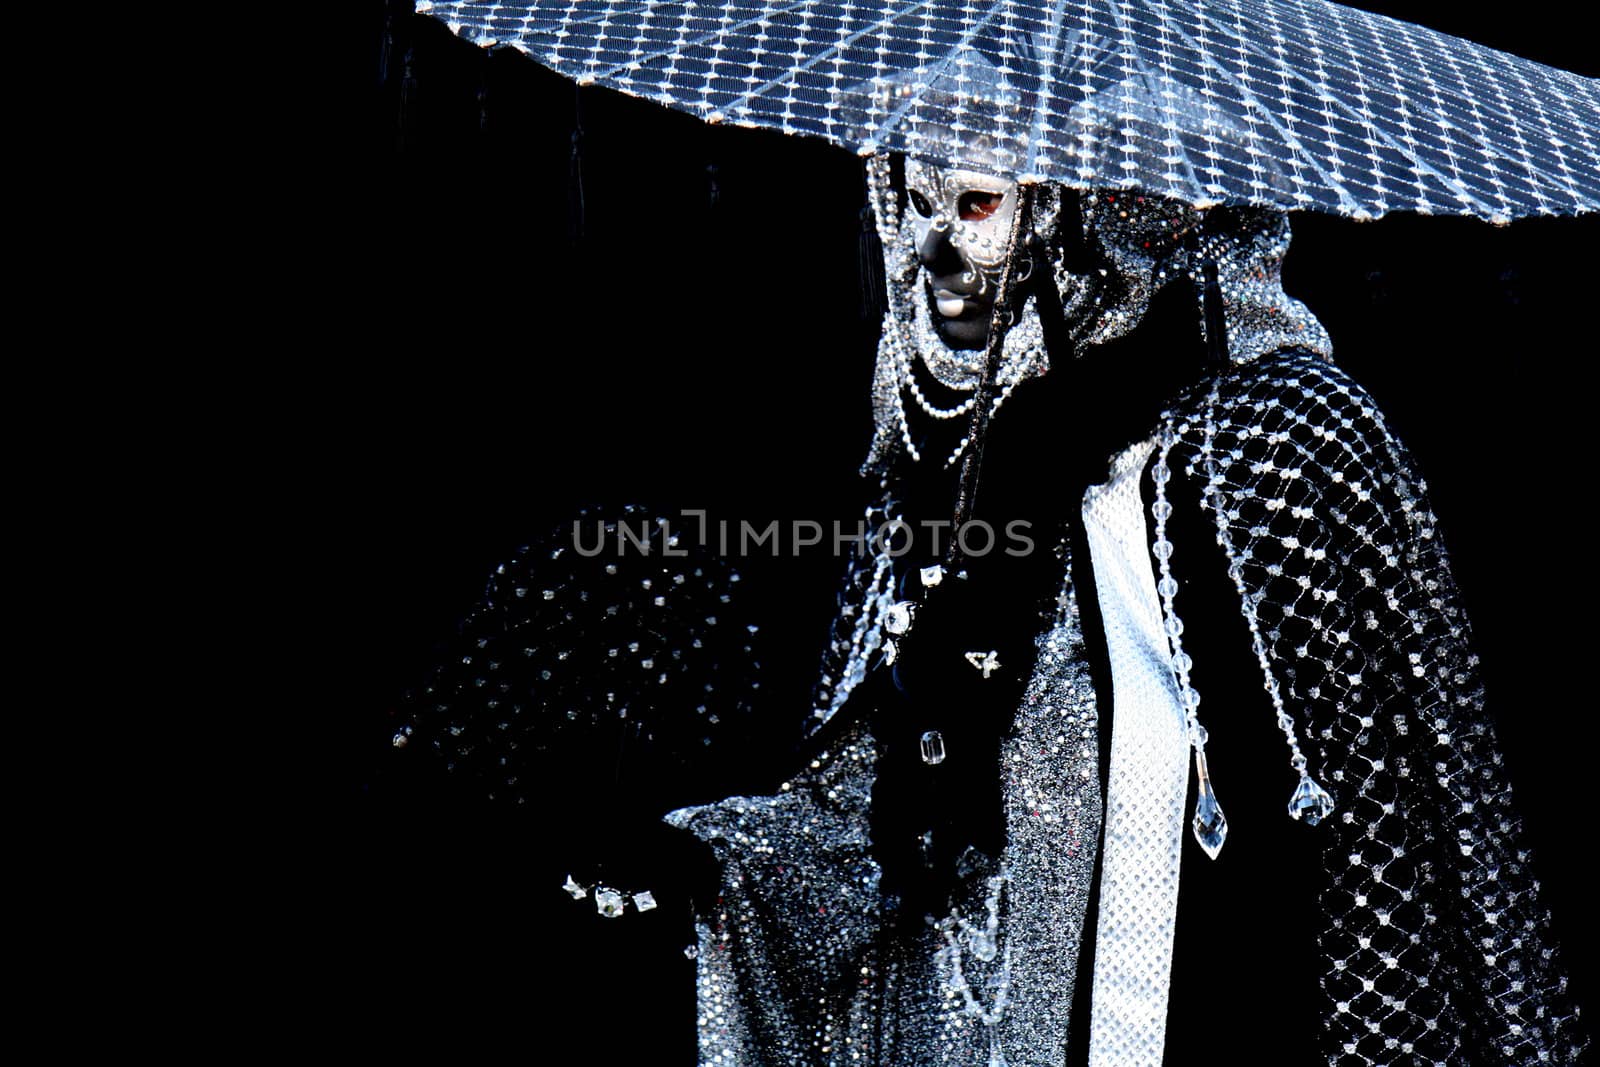 A masked man dressed in black, with a parasol, at the Venice Carnival